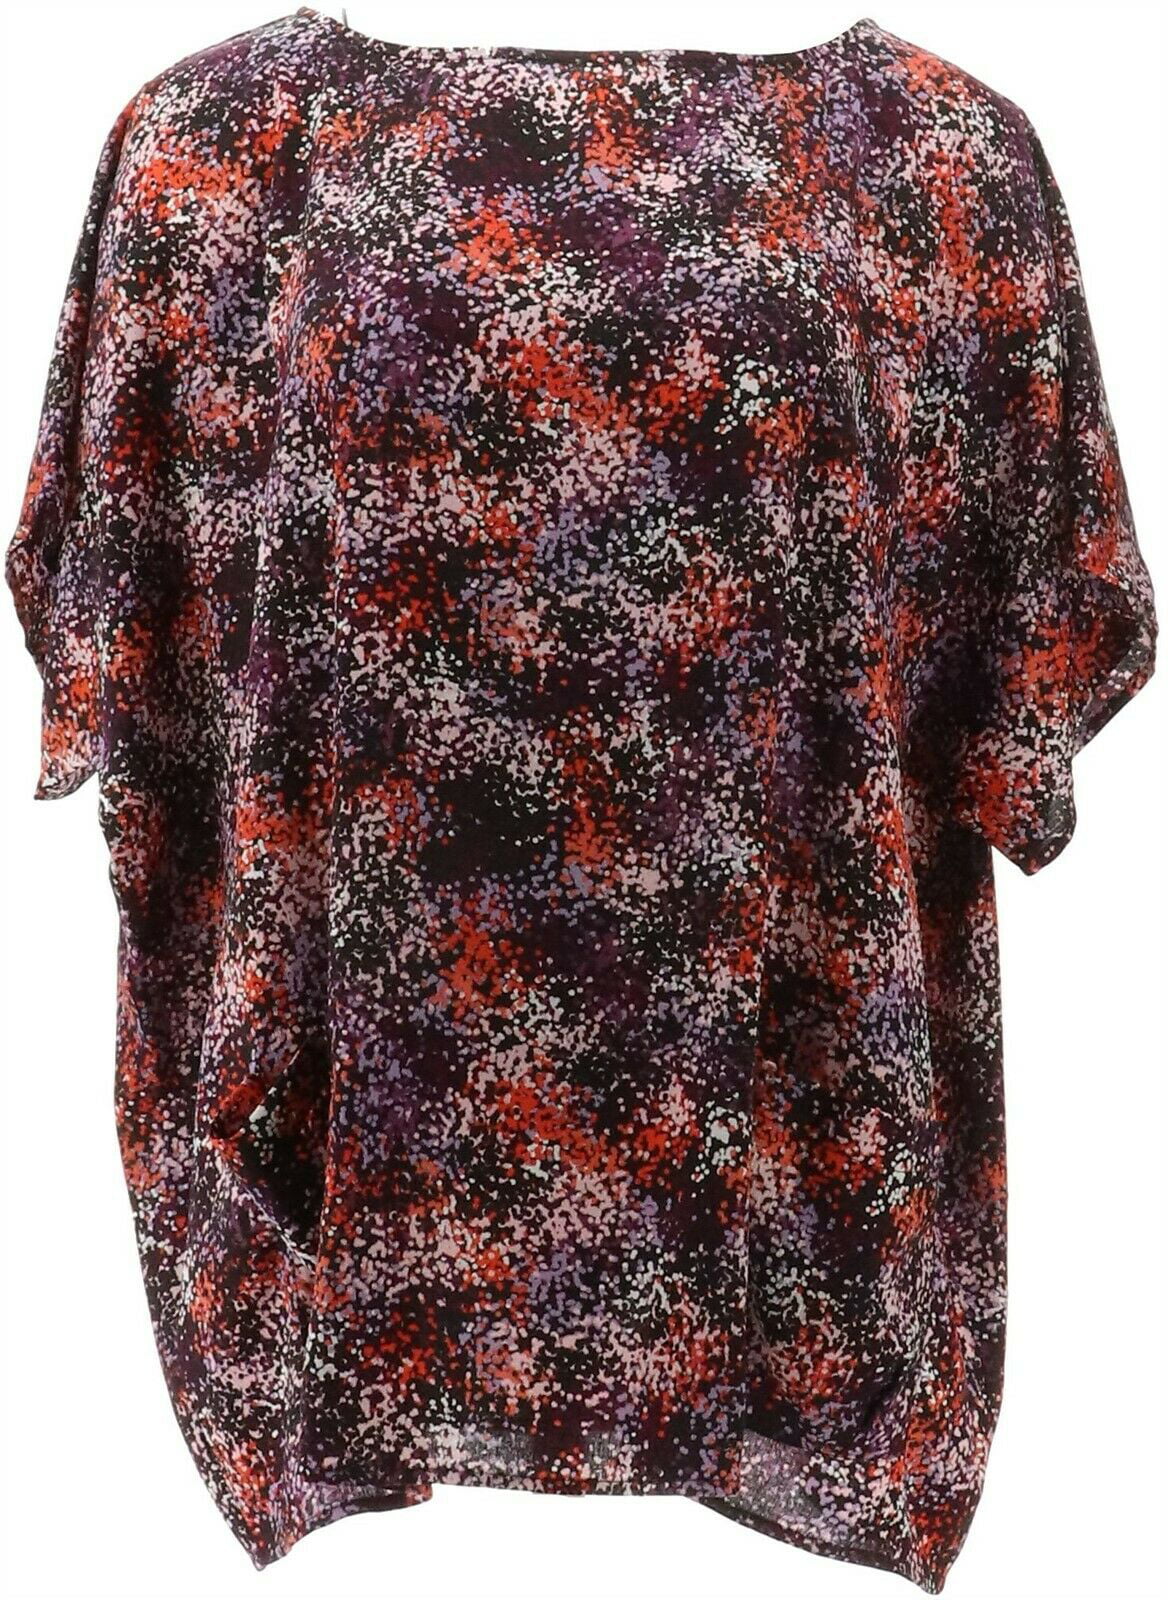 Isaac Mizrahi Ditsy Floral Printed Button Knit Top Cappuccino 1X NEW A375734